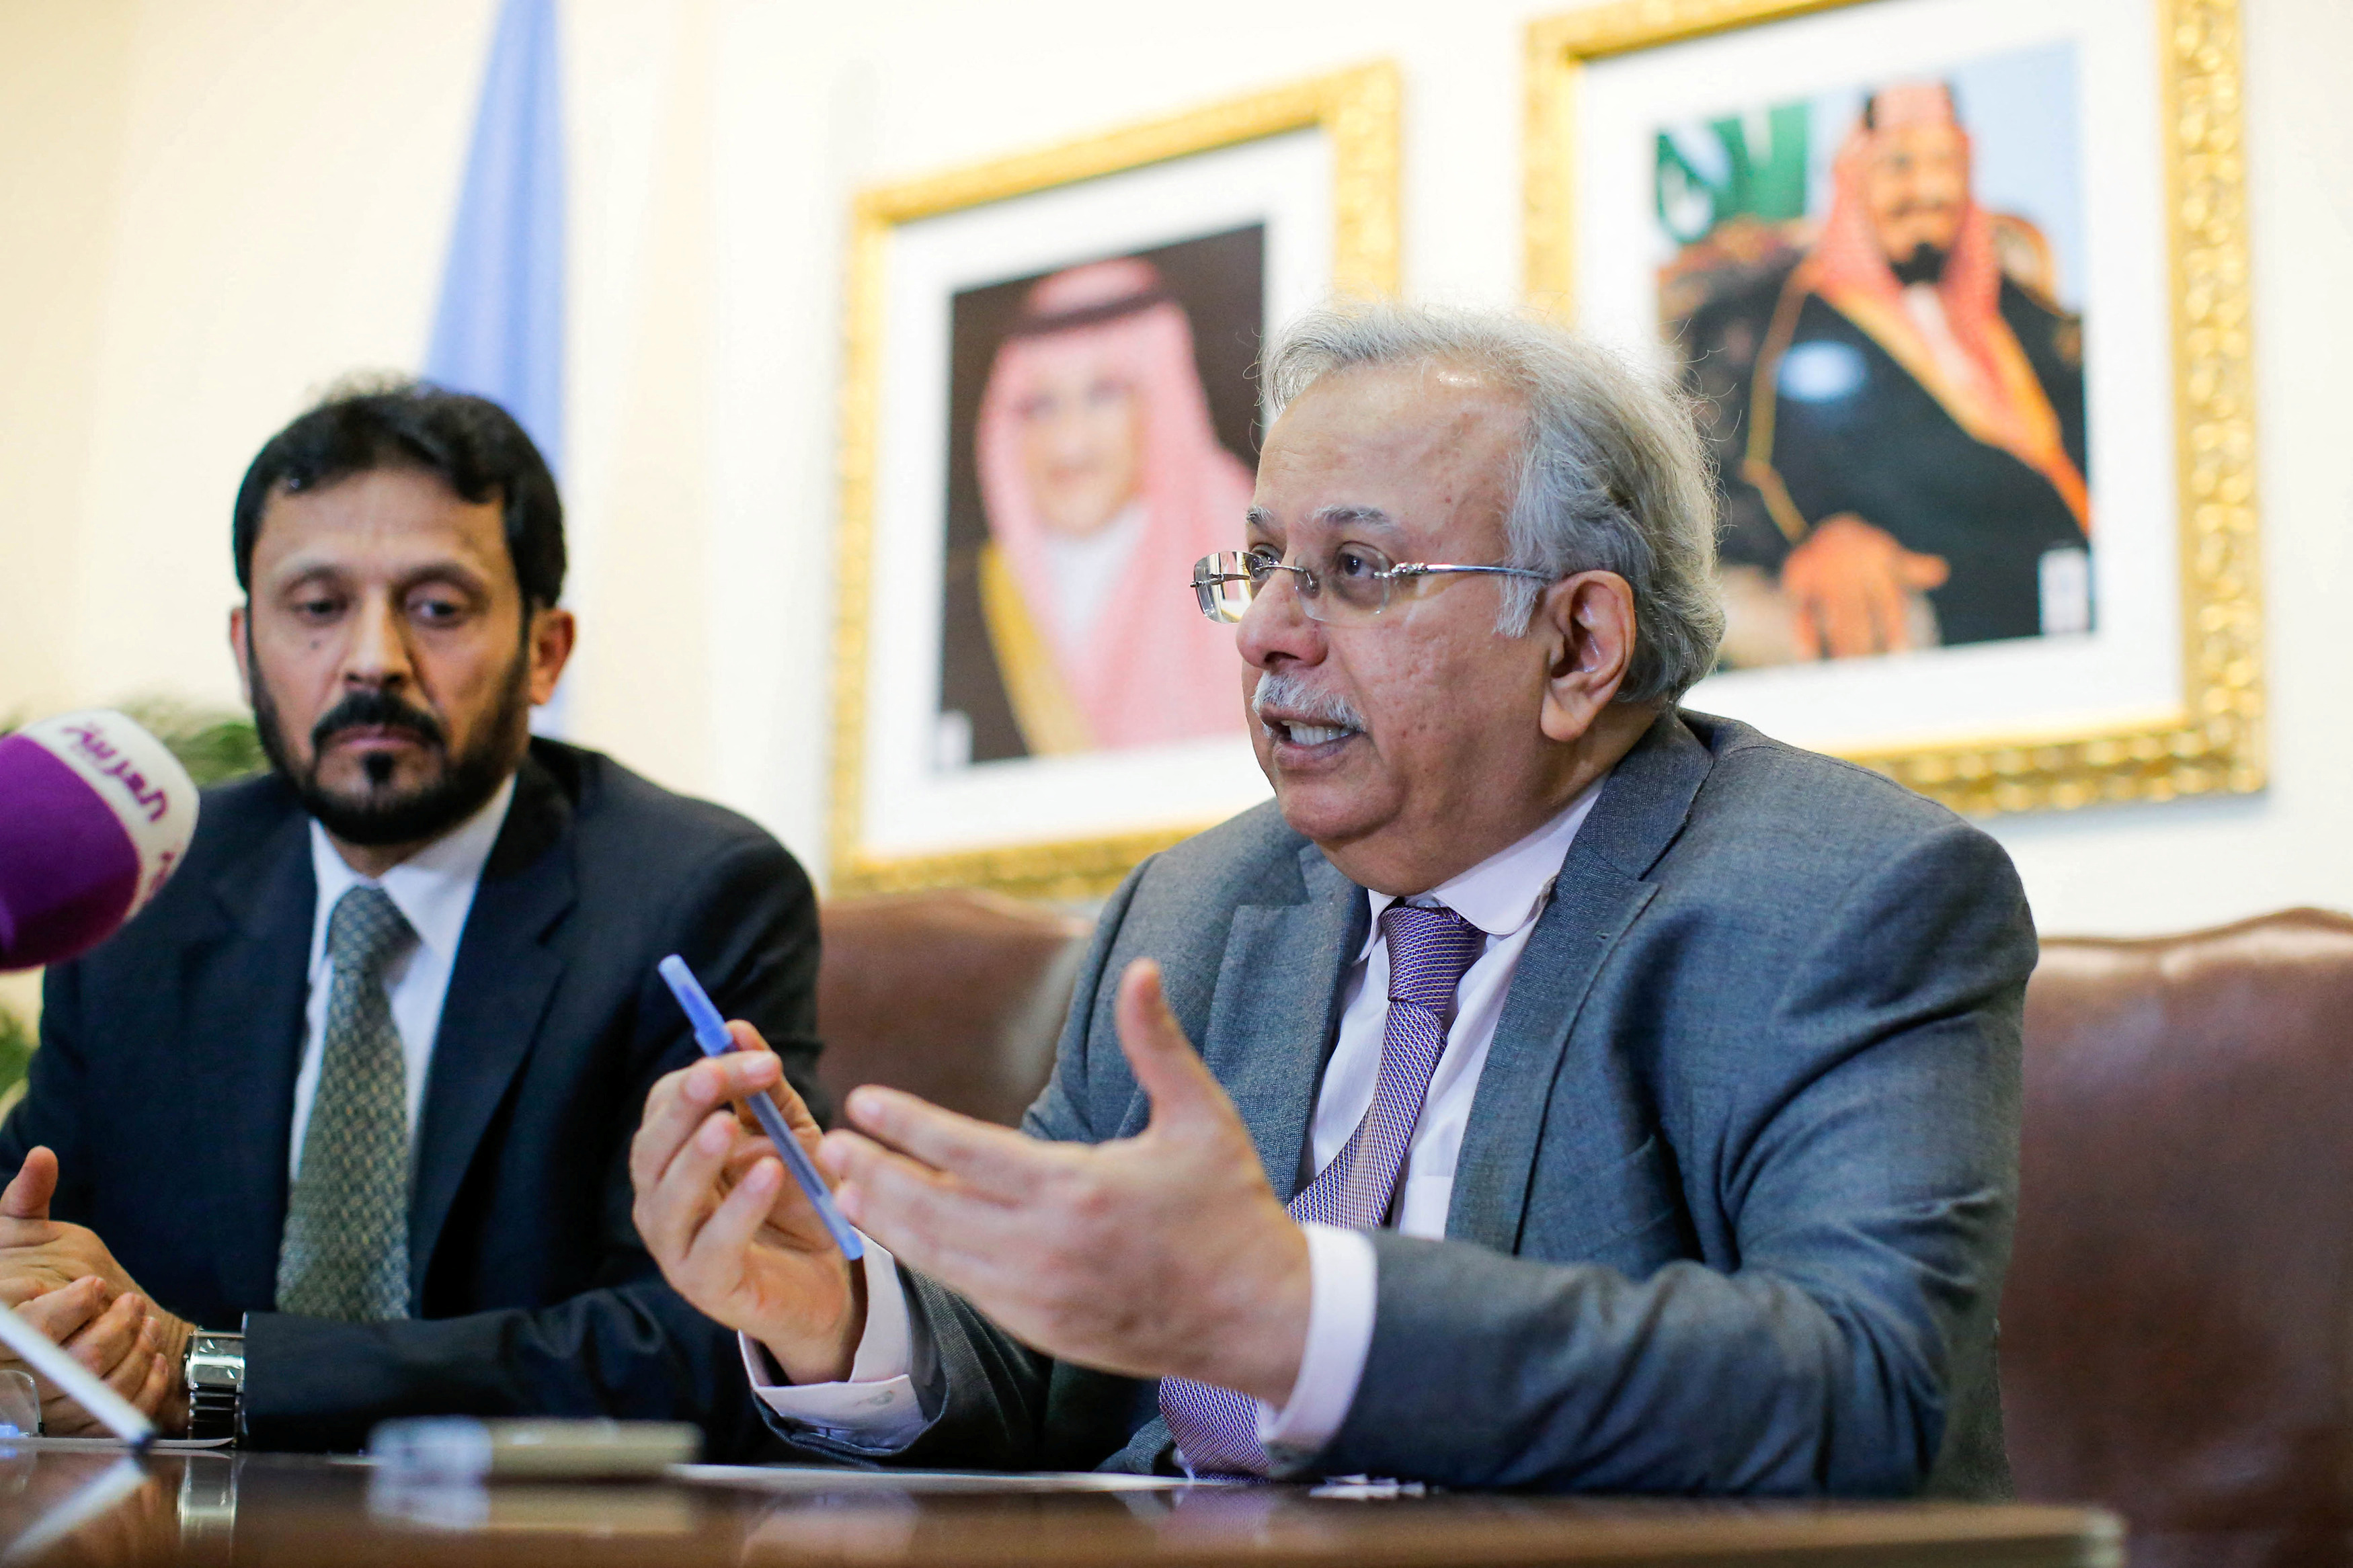 Saudi Arabia's Permanent Representative to the U.N Mouallimi speaks to the media next to Saudi general Ghanim during a news conference in New York